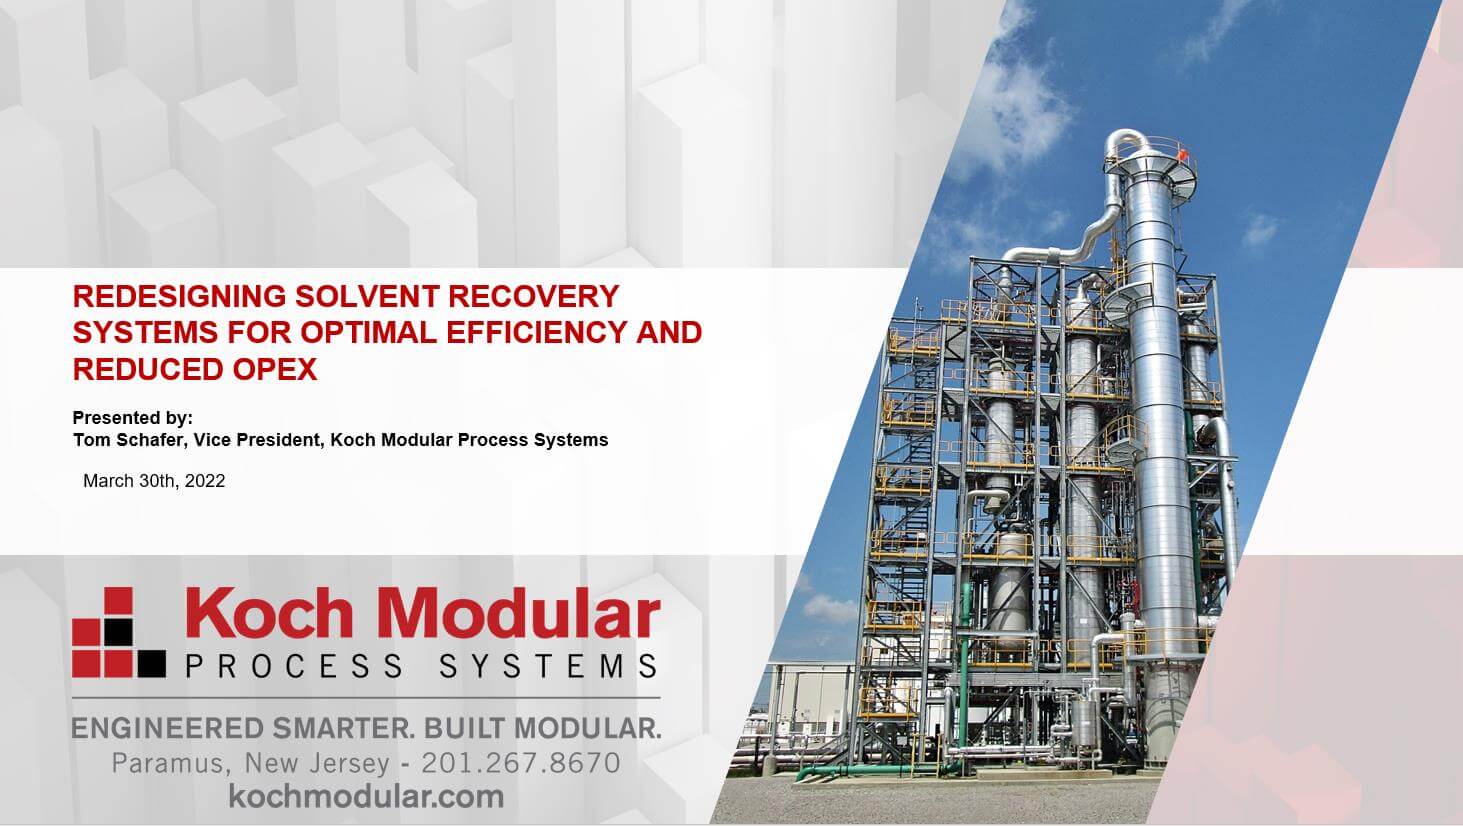 Redesigning Solvent Recovery Systems For Optimal Efficiency And Reduced OPEX